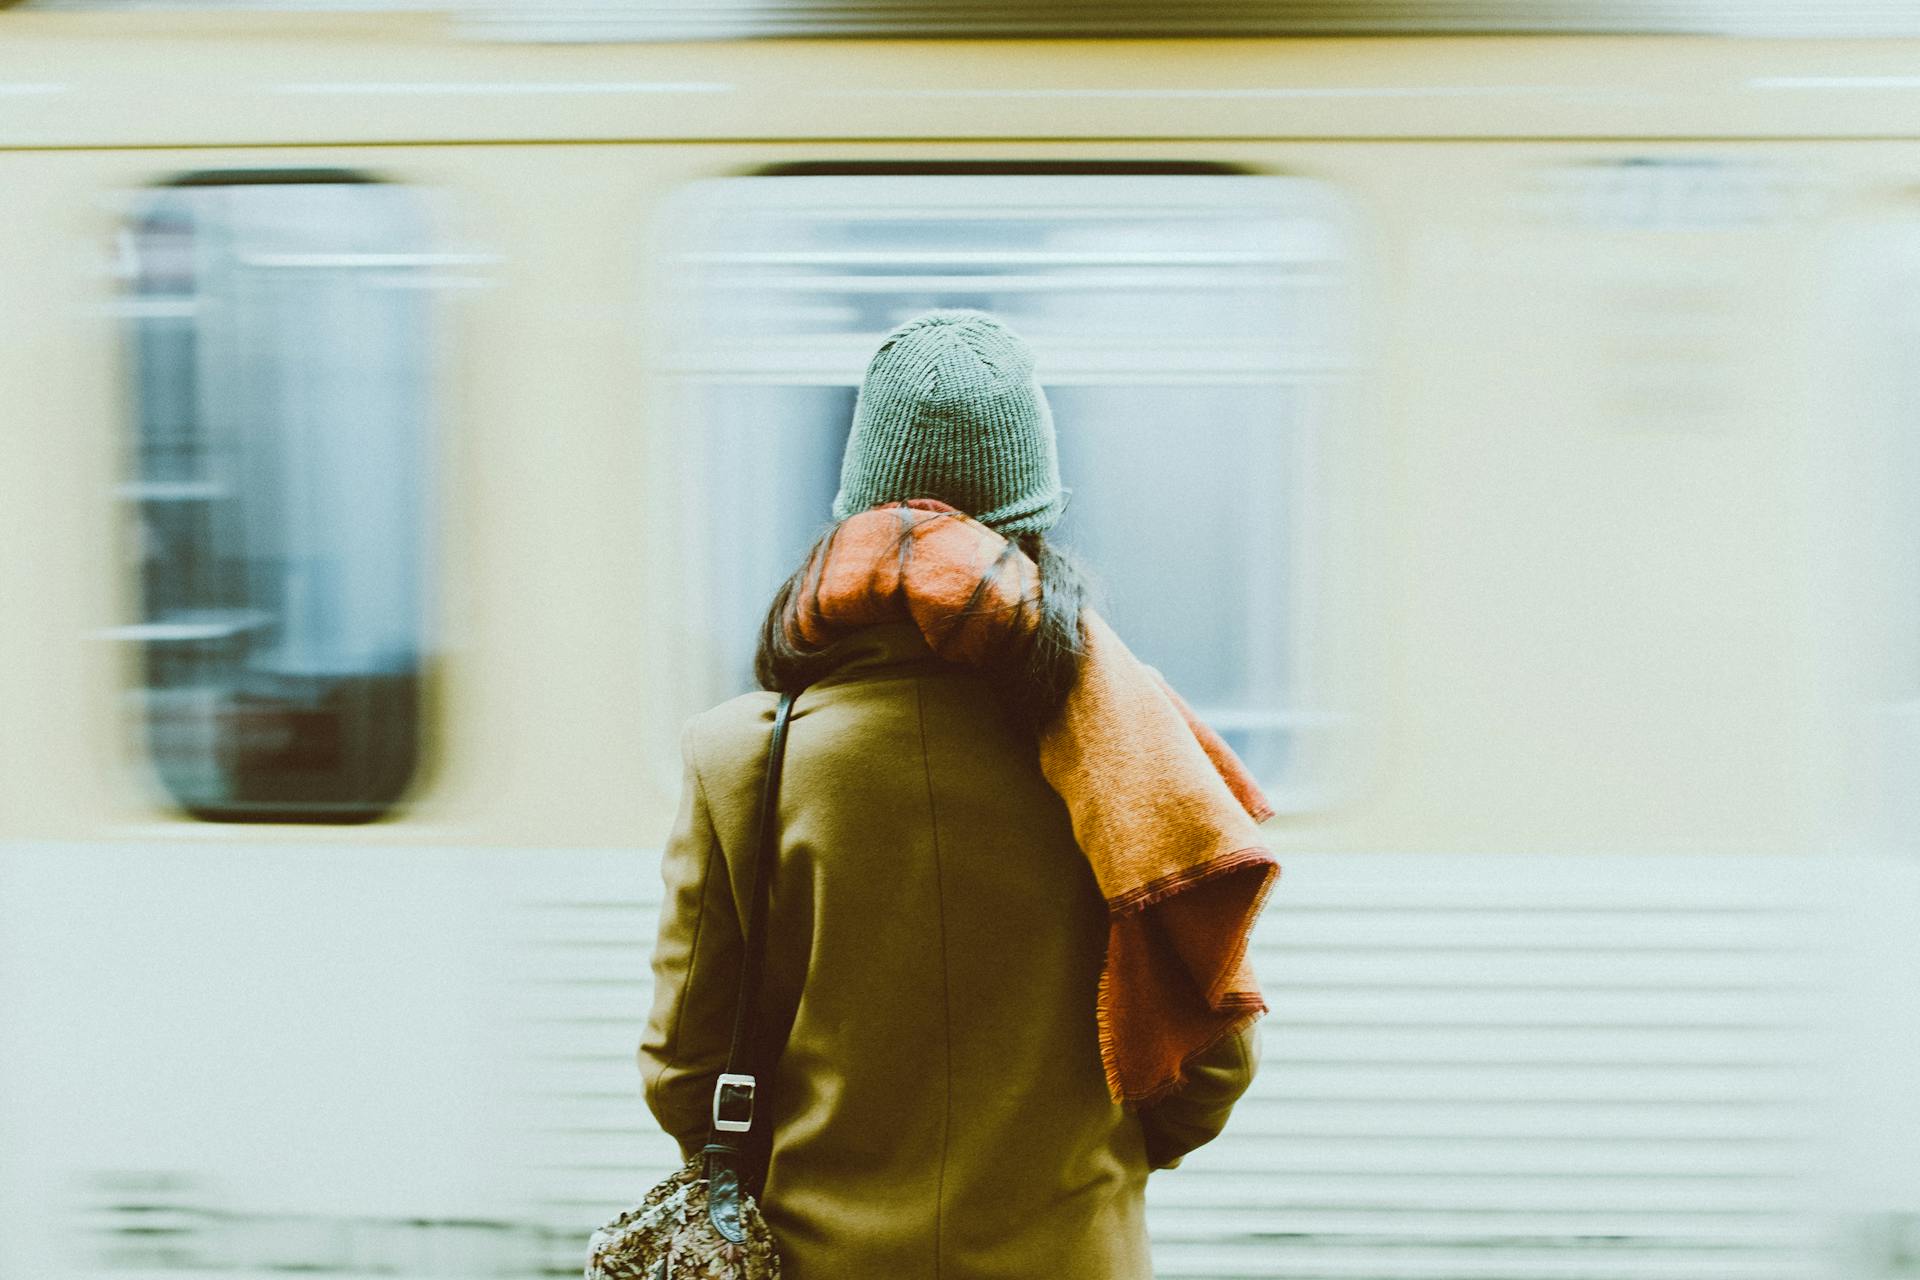 A time-lapse photo of a person standing near a train | Source: Pexels